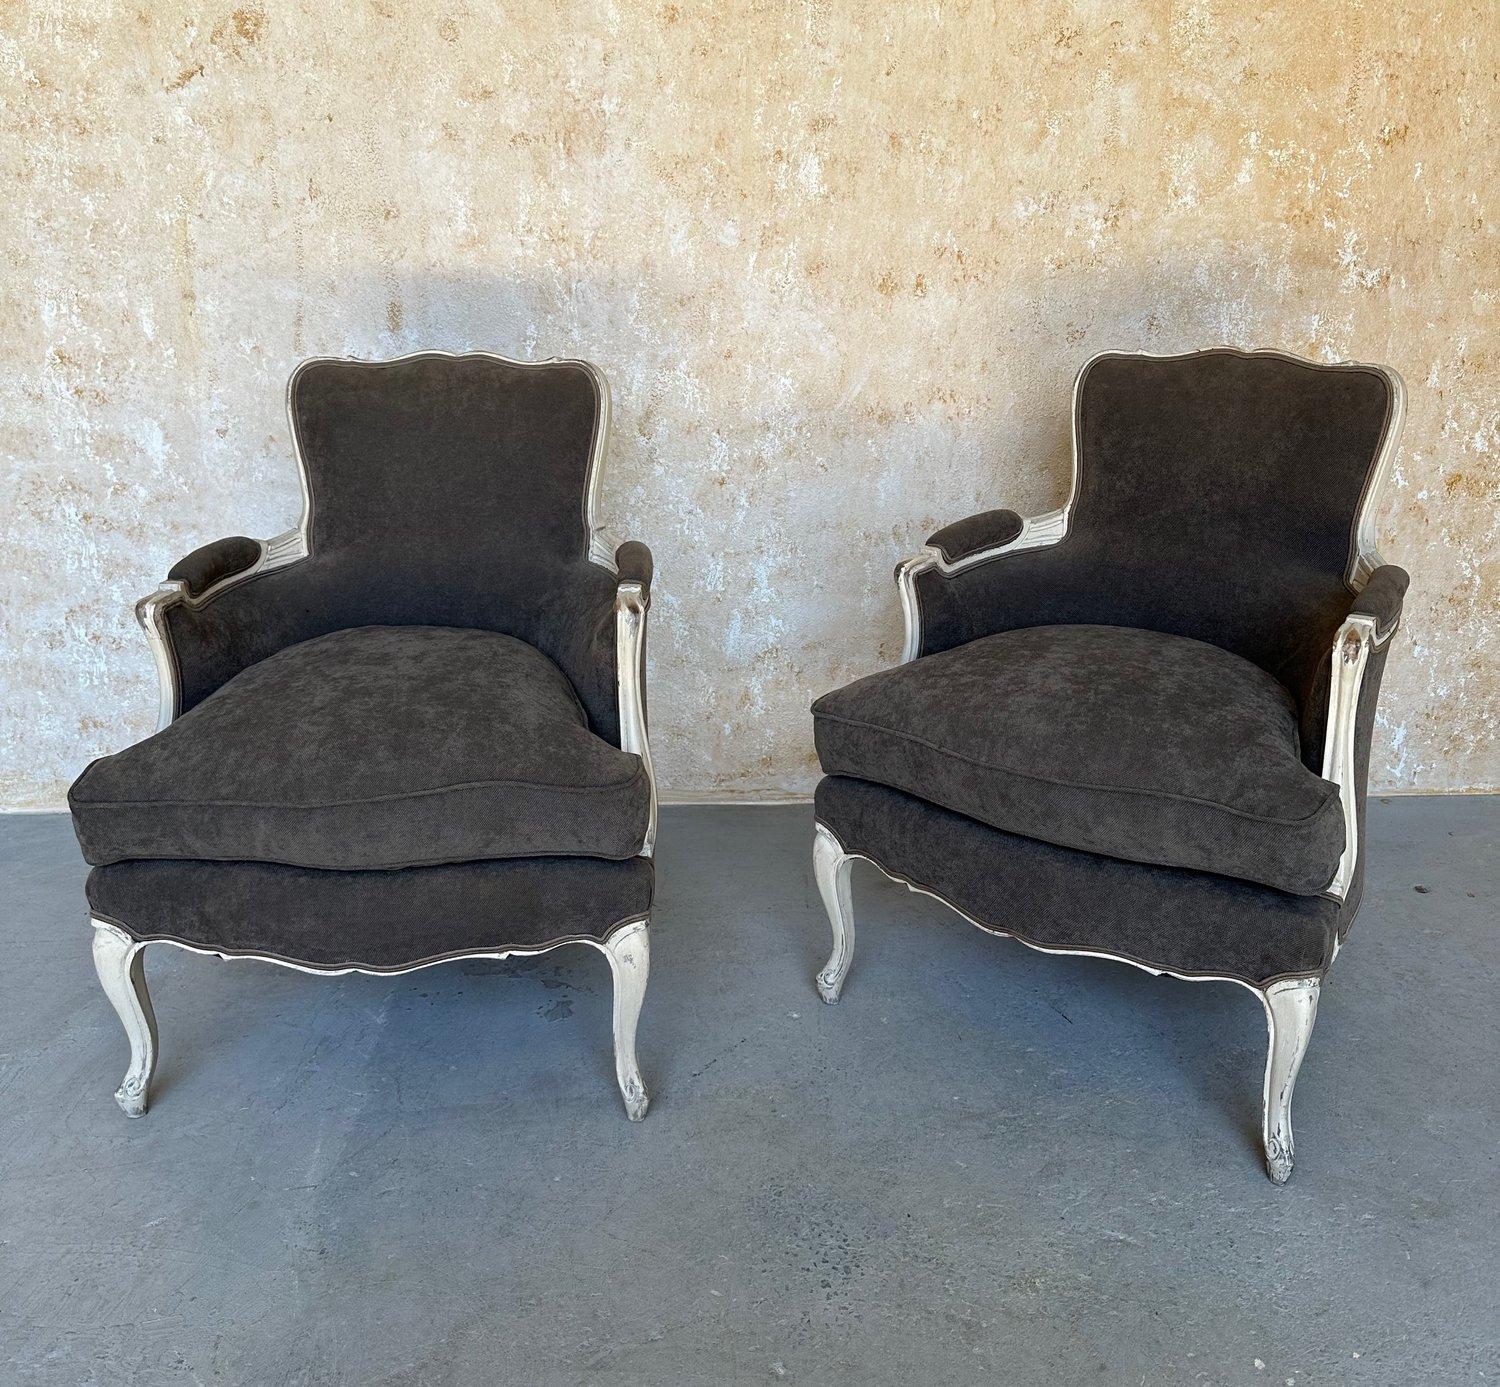 An elegant pair of French Louis XV style armchairs upholstered in gray fabric with matching piping. The ornate carved wooden frames are masterfully painted in a beautifully antiqued white patina that contrasts the rich gray upholstery. The padded